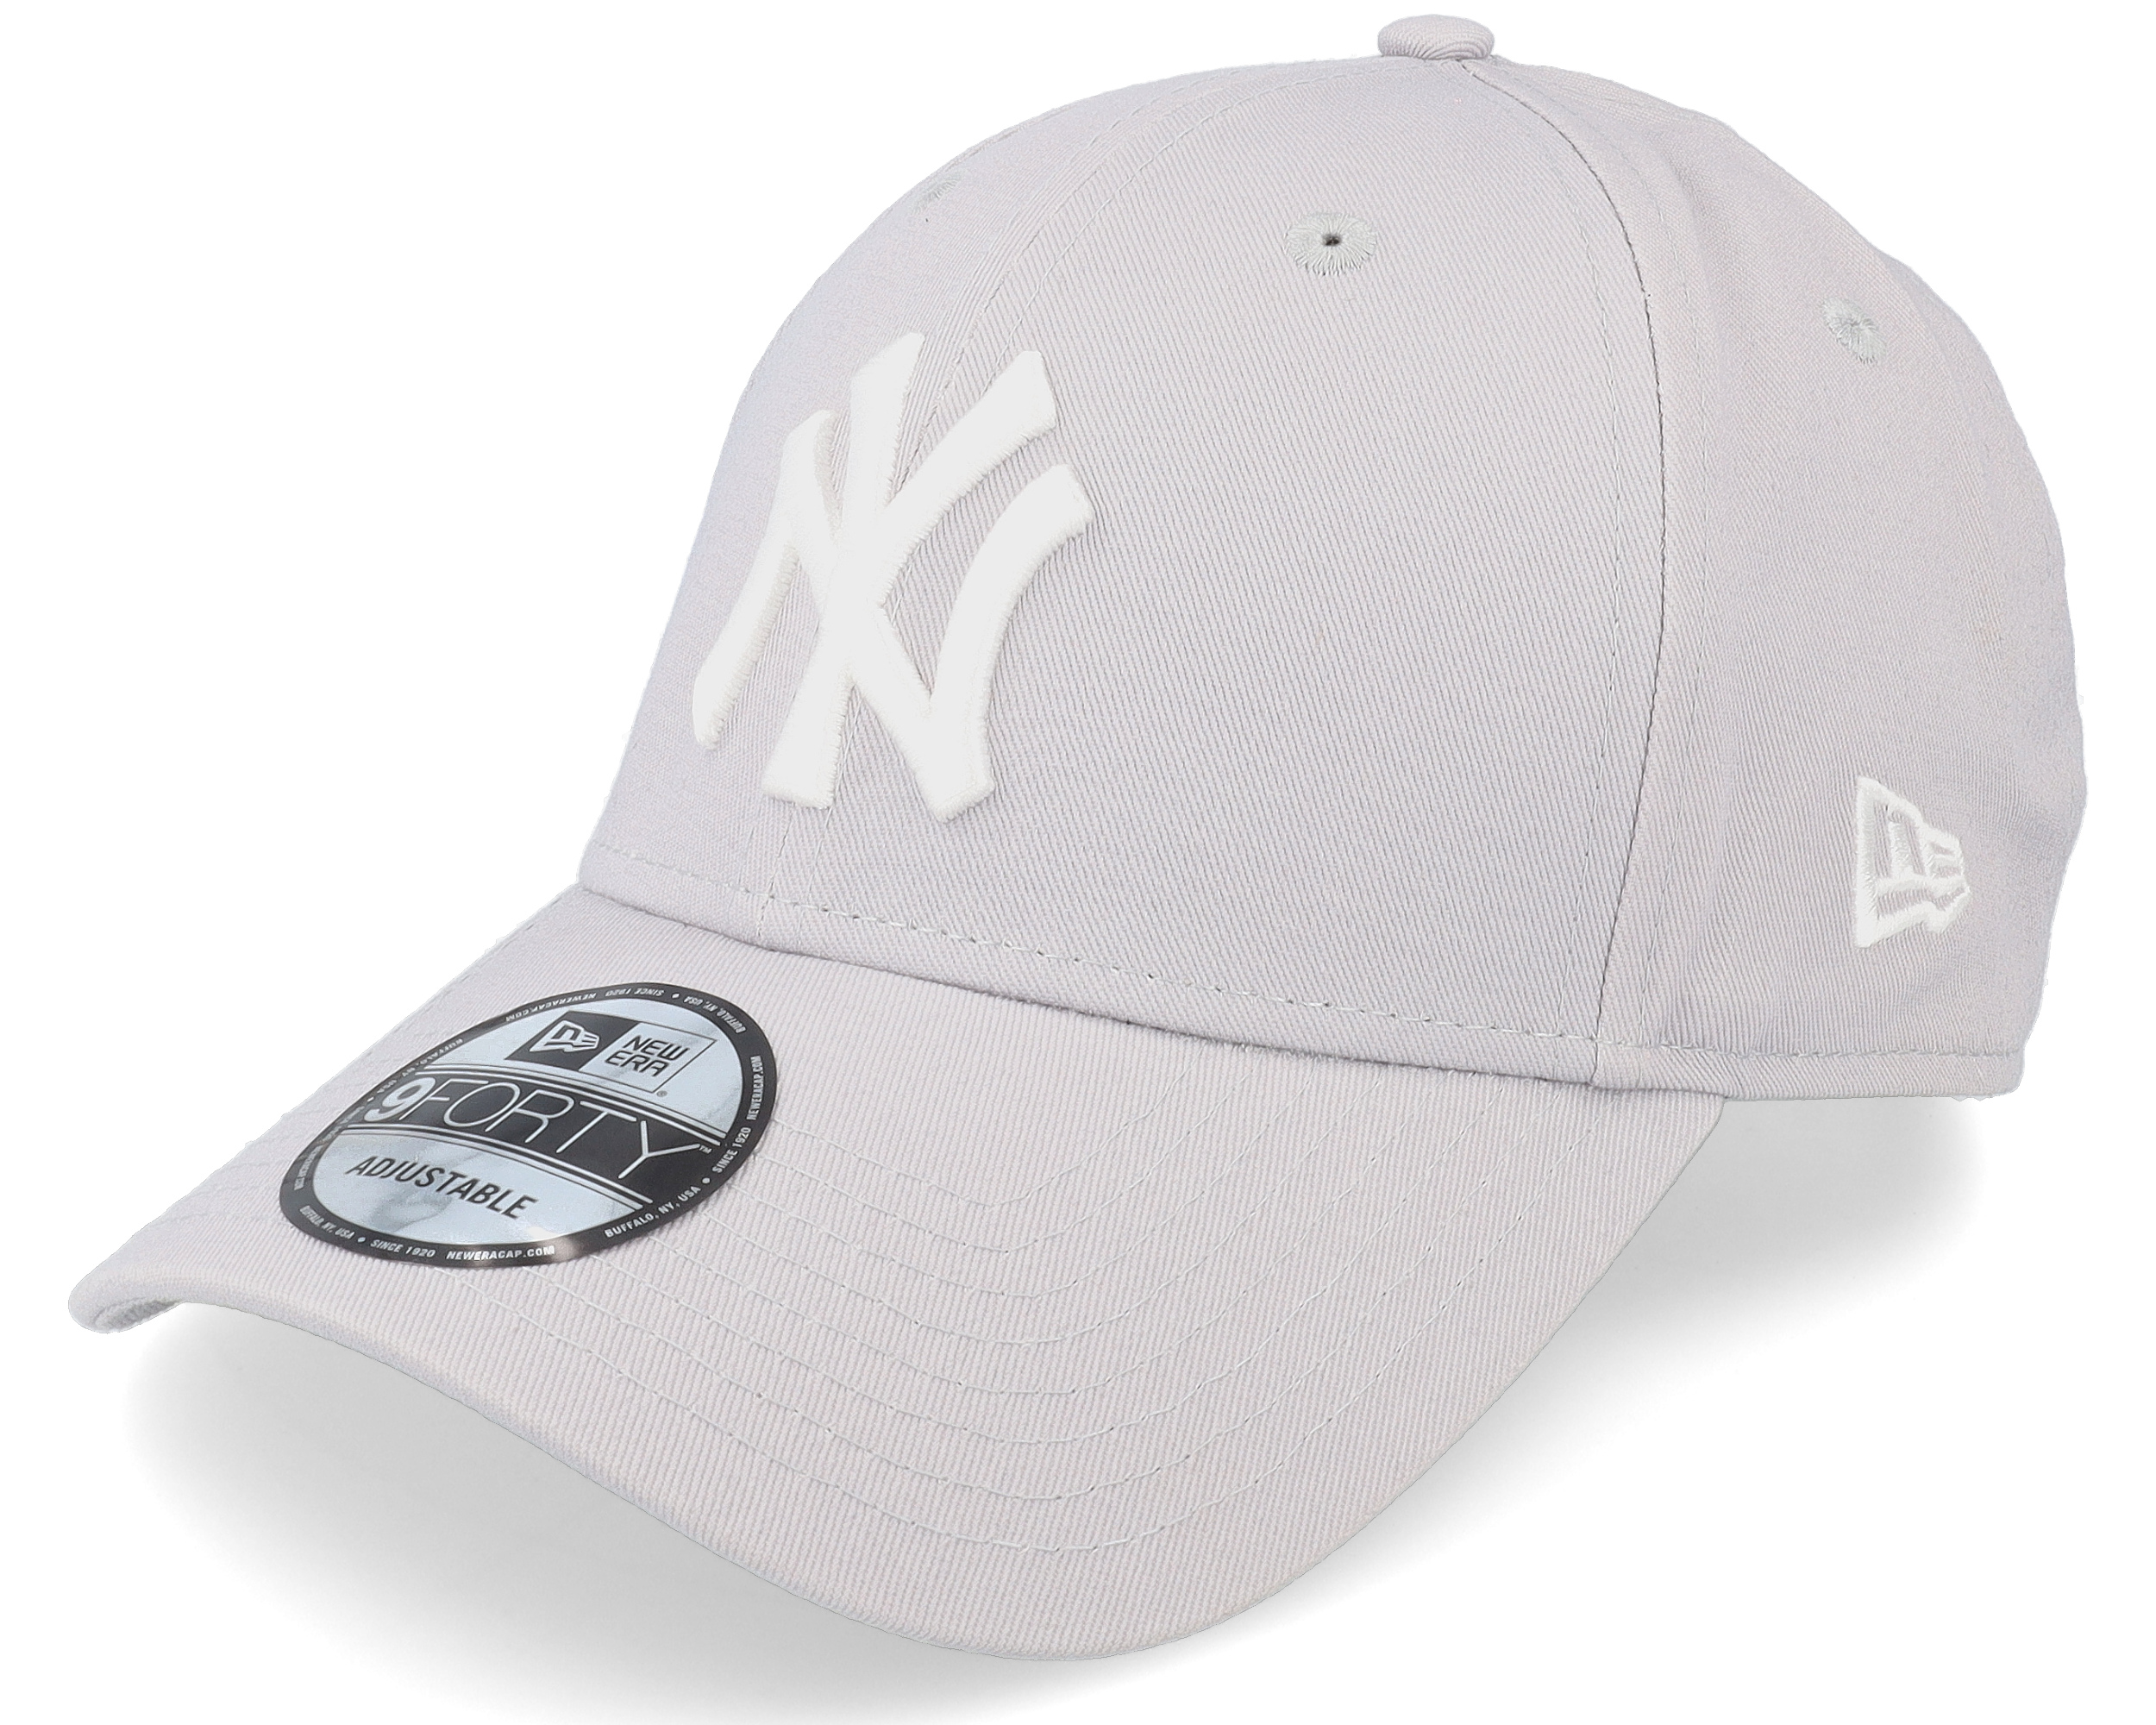 New Era 9forty New York Yankees - Gorra para mujer, color gris :  : Deportes y Aire Libre